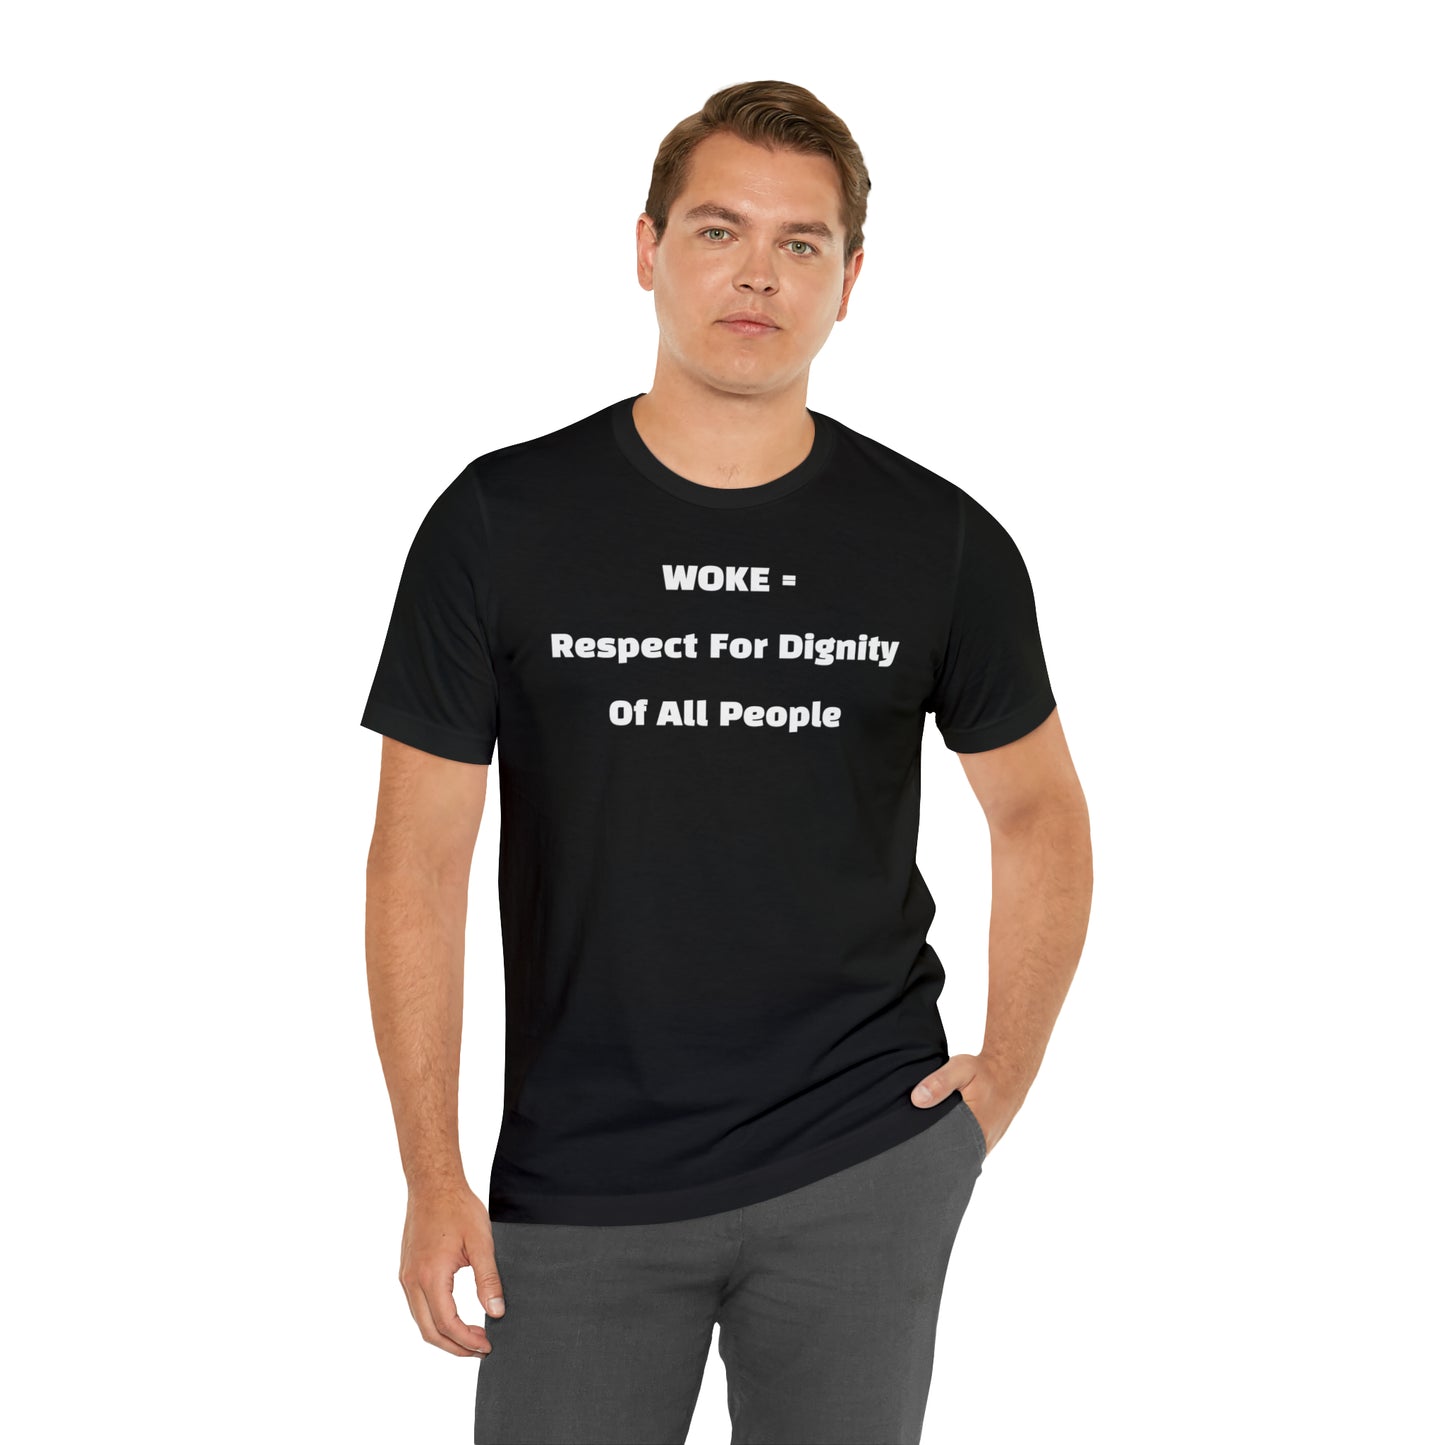 Woke = Respect and Dignity T-shirt